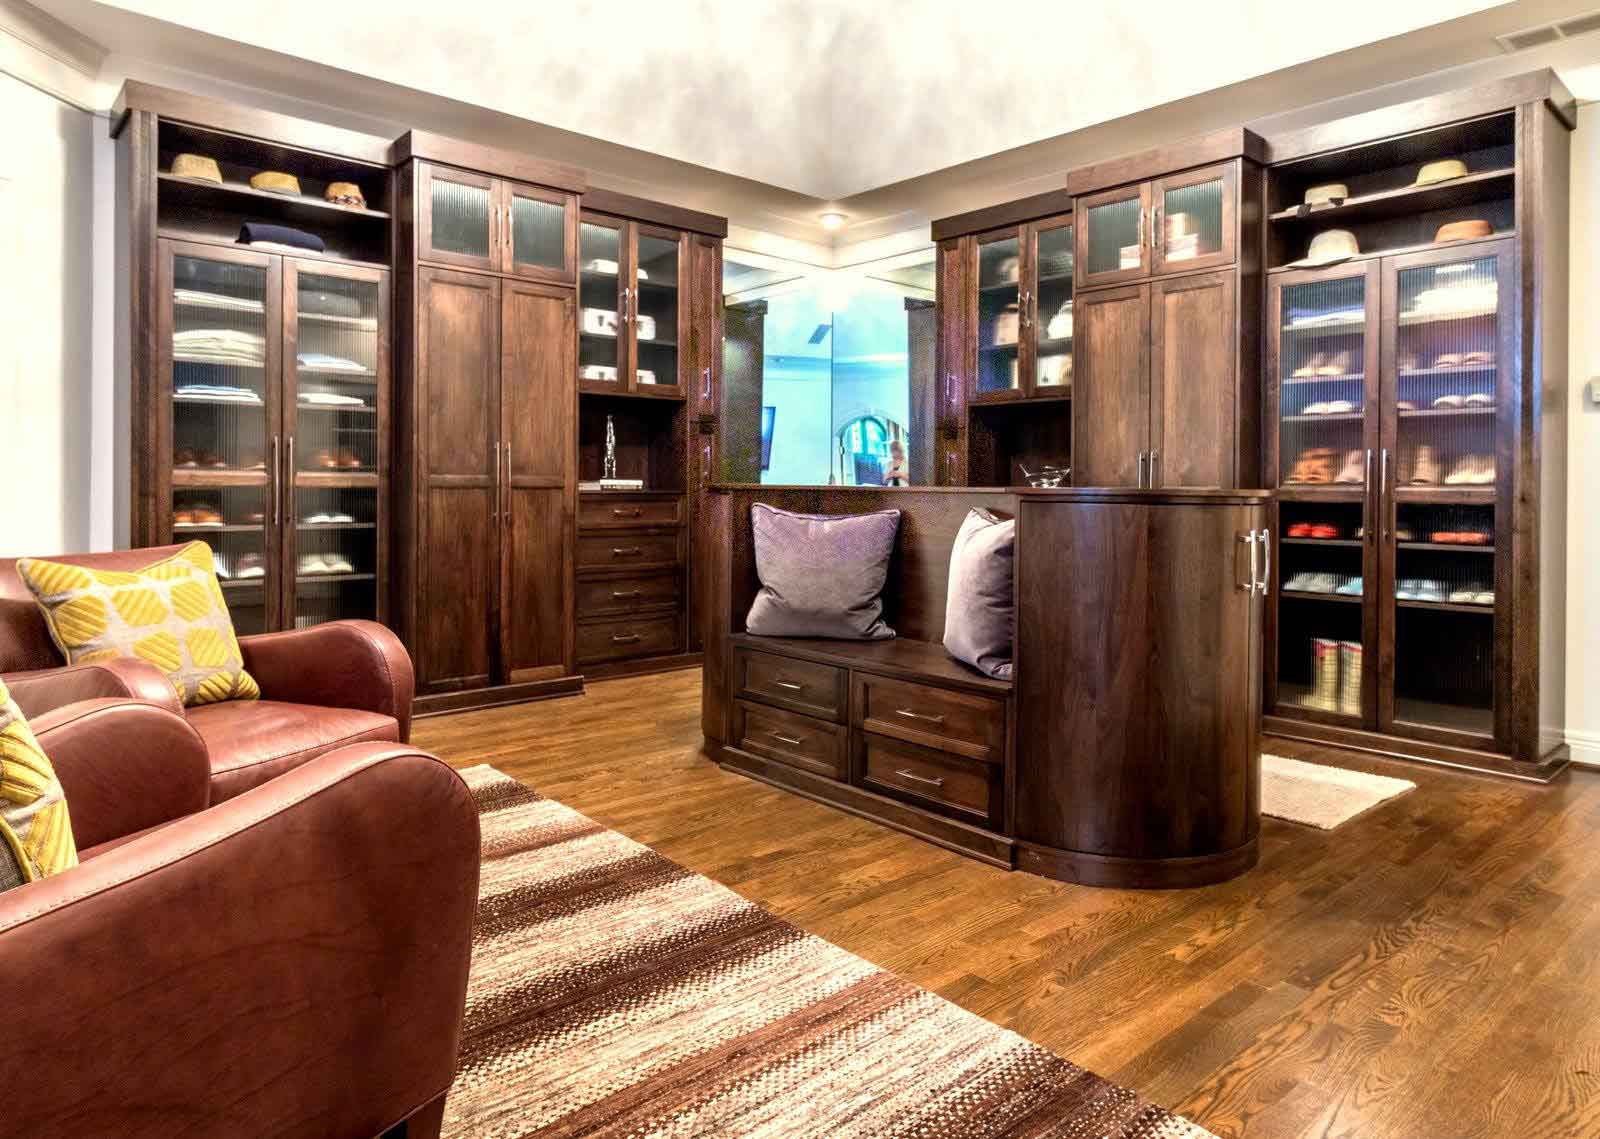 Stylish Closet Systems: How Style Creates Luxury to Match Your Home ...